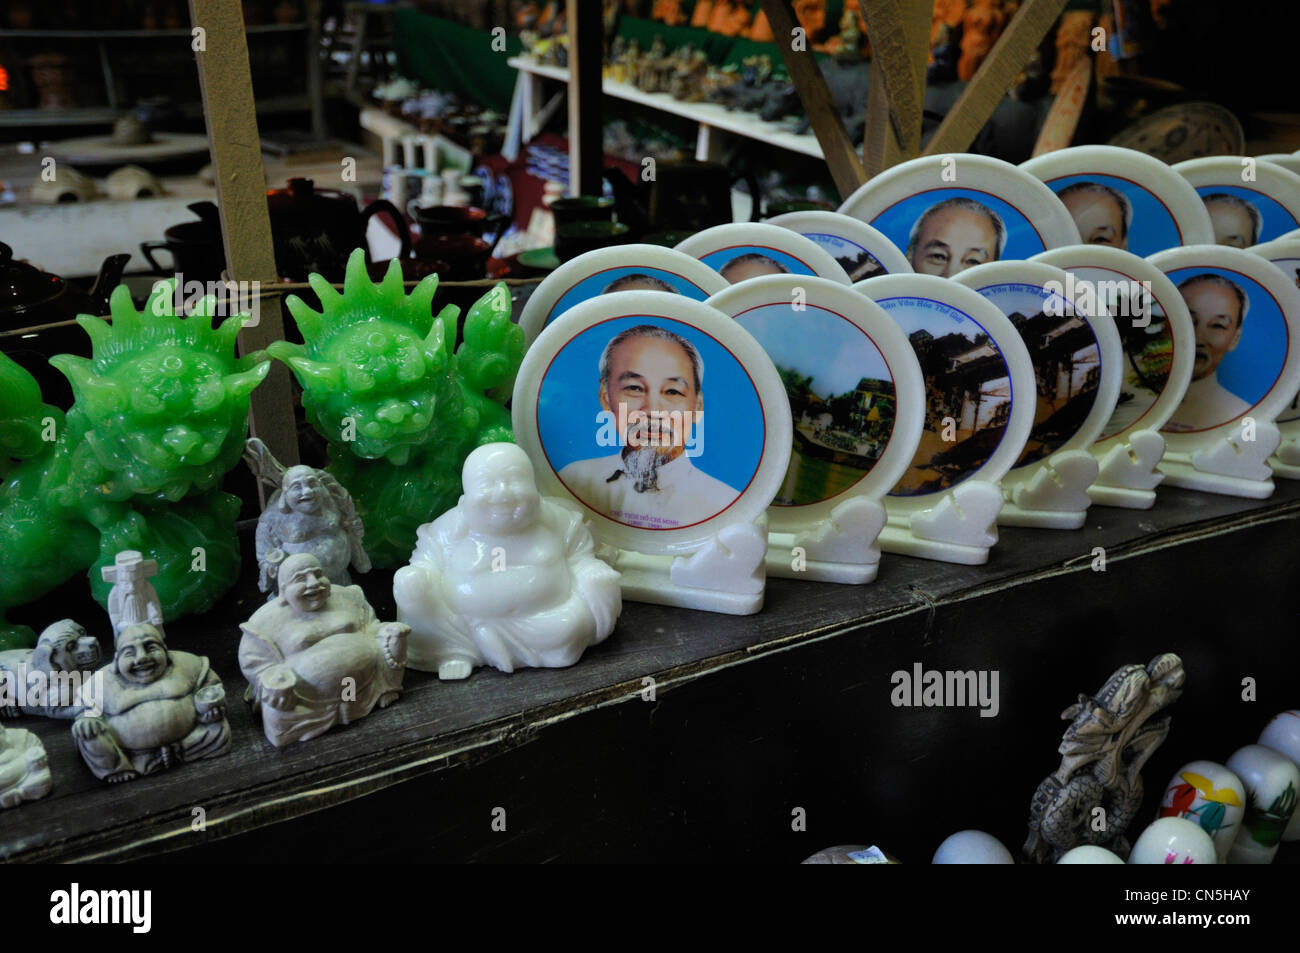 Vietnam, Quang Nam Province, Hoi An, Old Town, Ho Chi Minh pictures in a souvenir shop for tourists Stock Photo